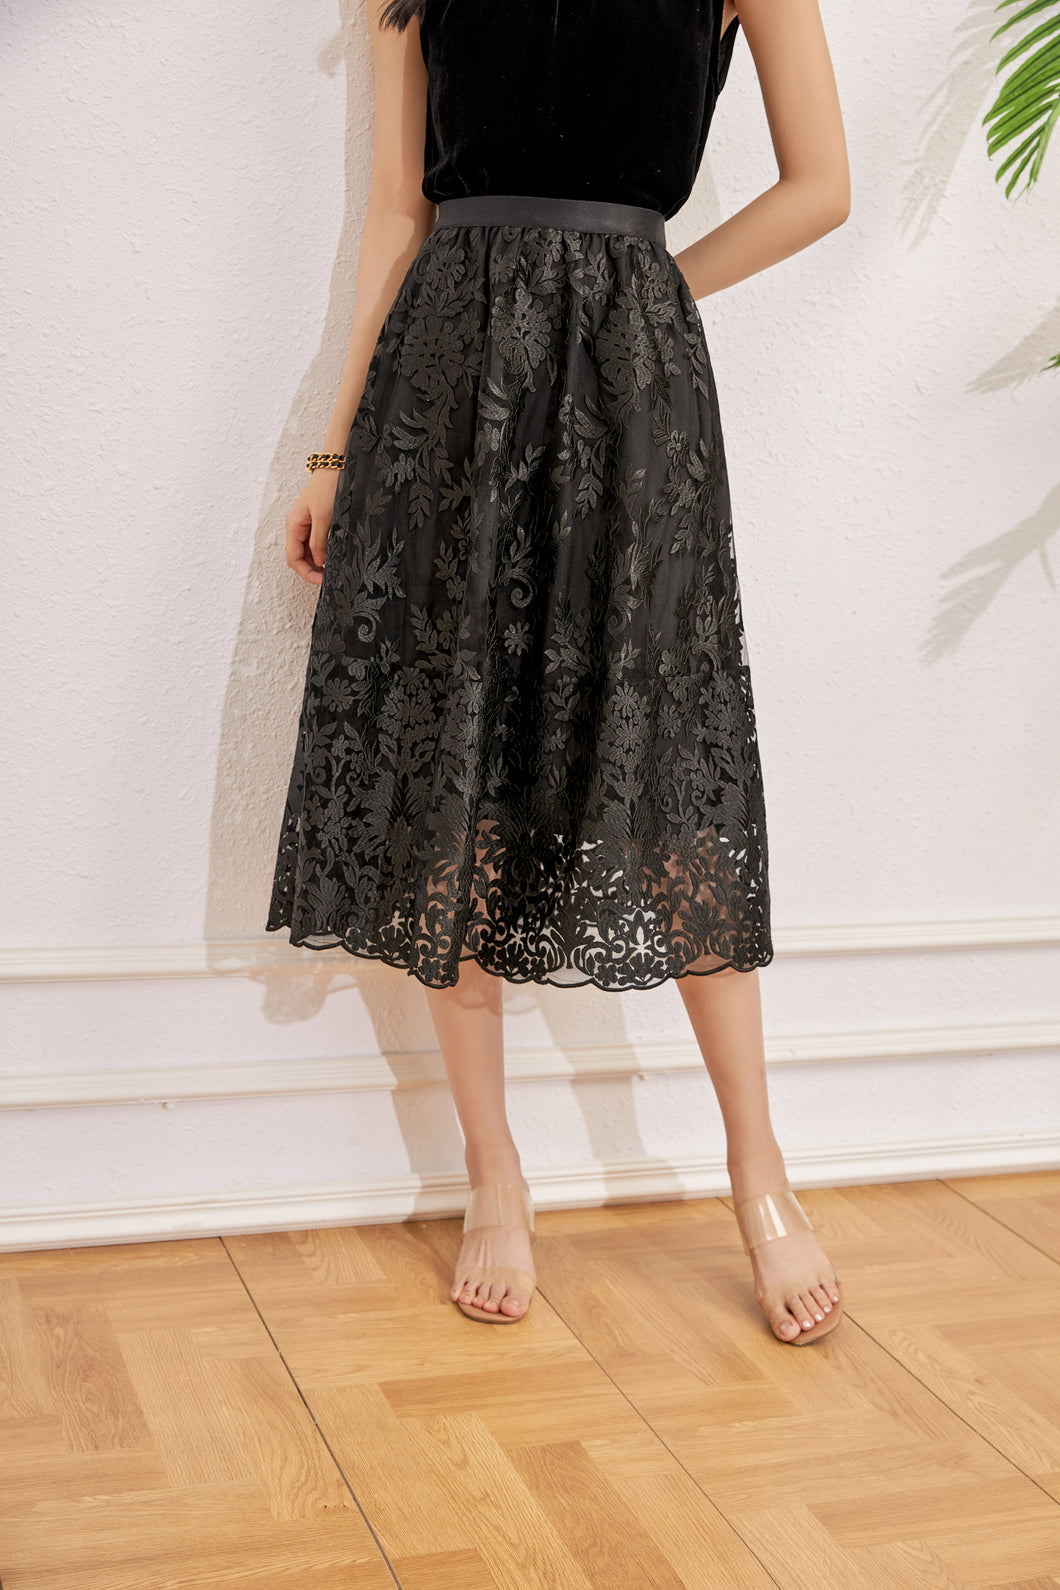 Yara A line lace embroidery skirt with elastic waist